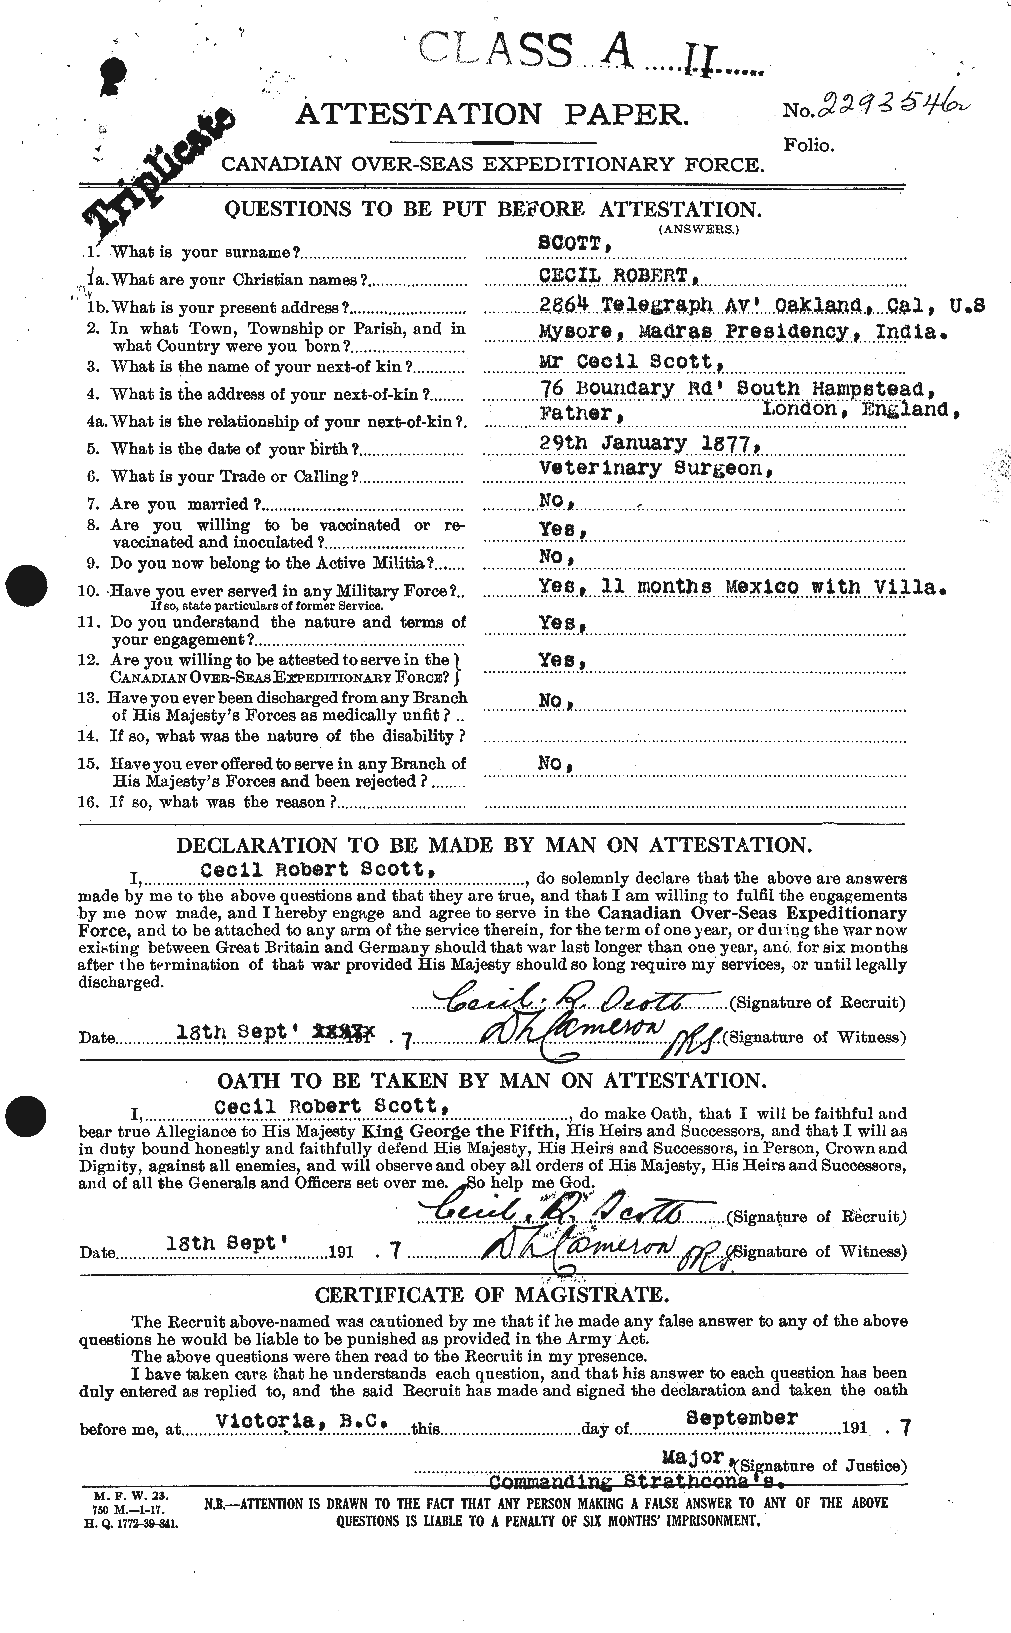 Personnel Records of the First World War - CEF 086198a